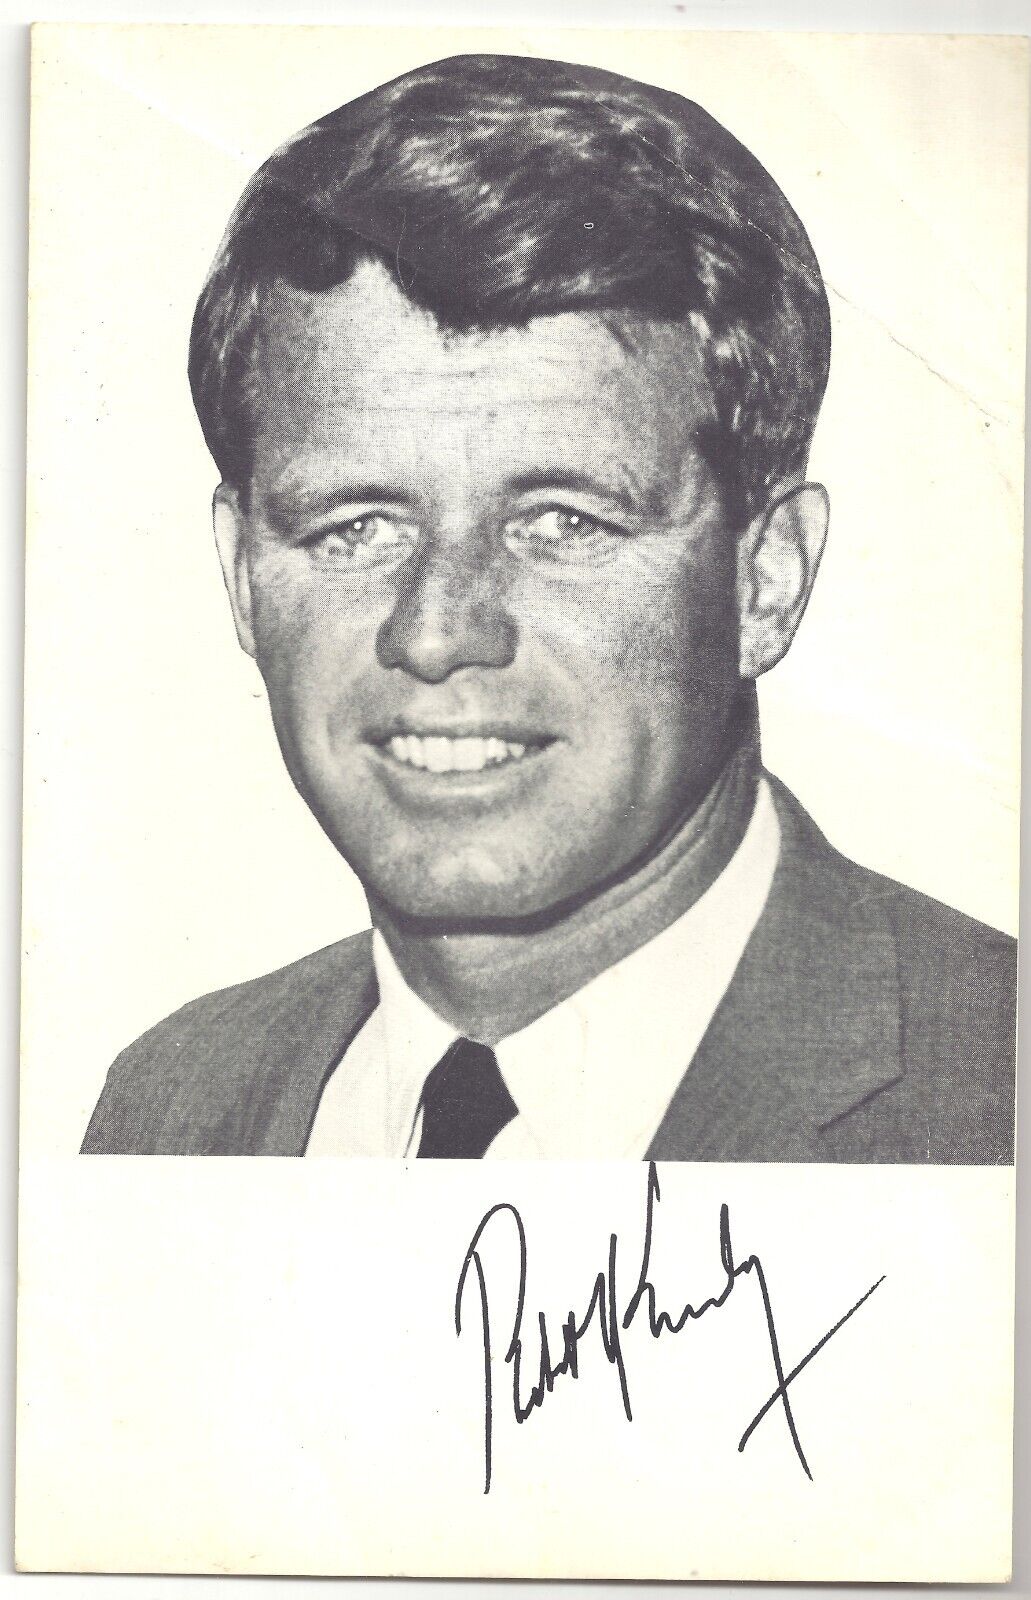 1964 New York Large Robert F Kennedy Voter\'s Photo Card IN SPANISH For US SENATE